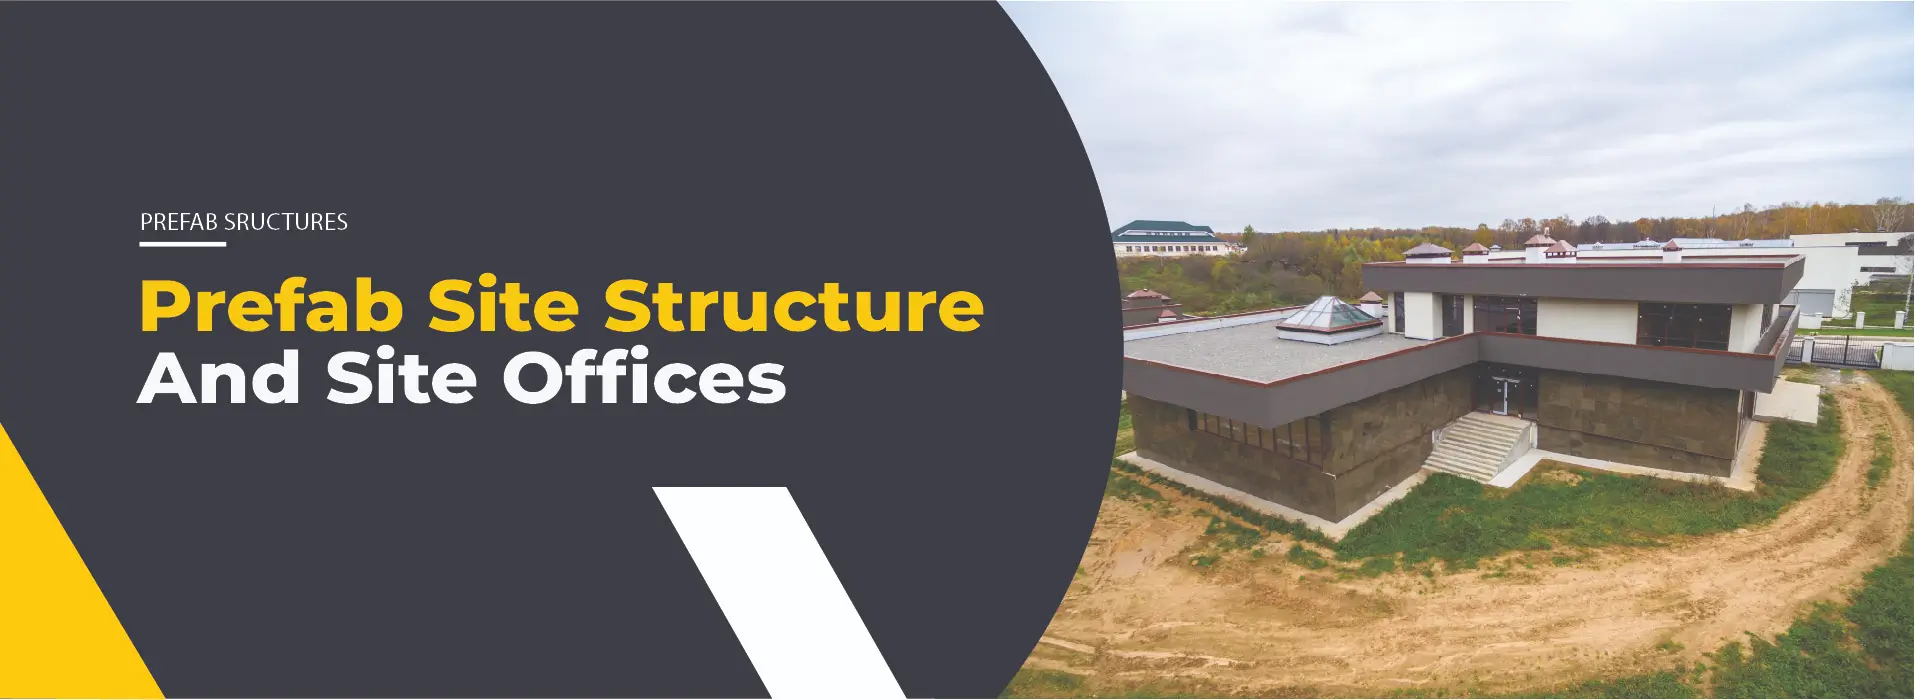 Prefab Site structure And Site Offices